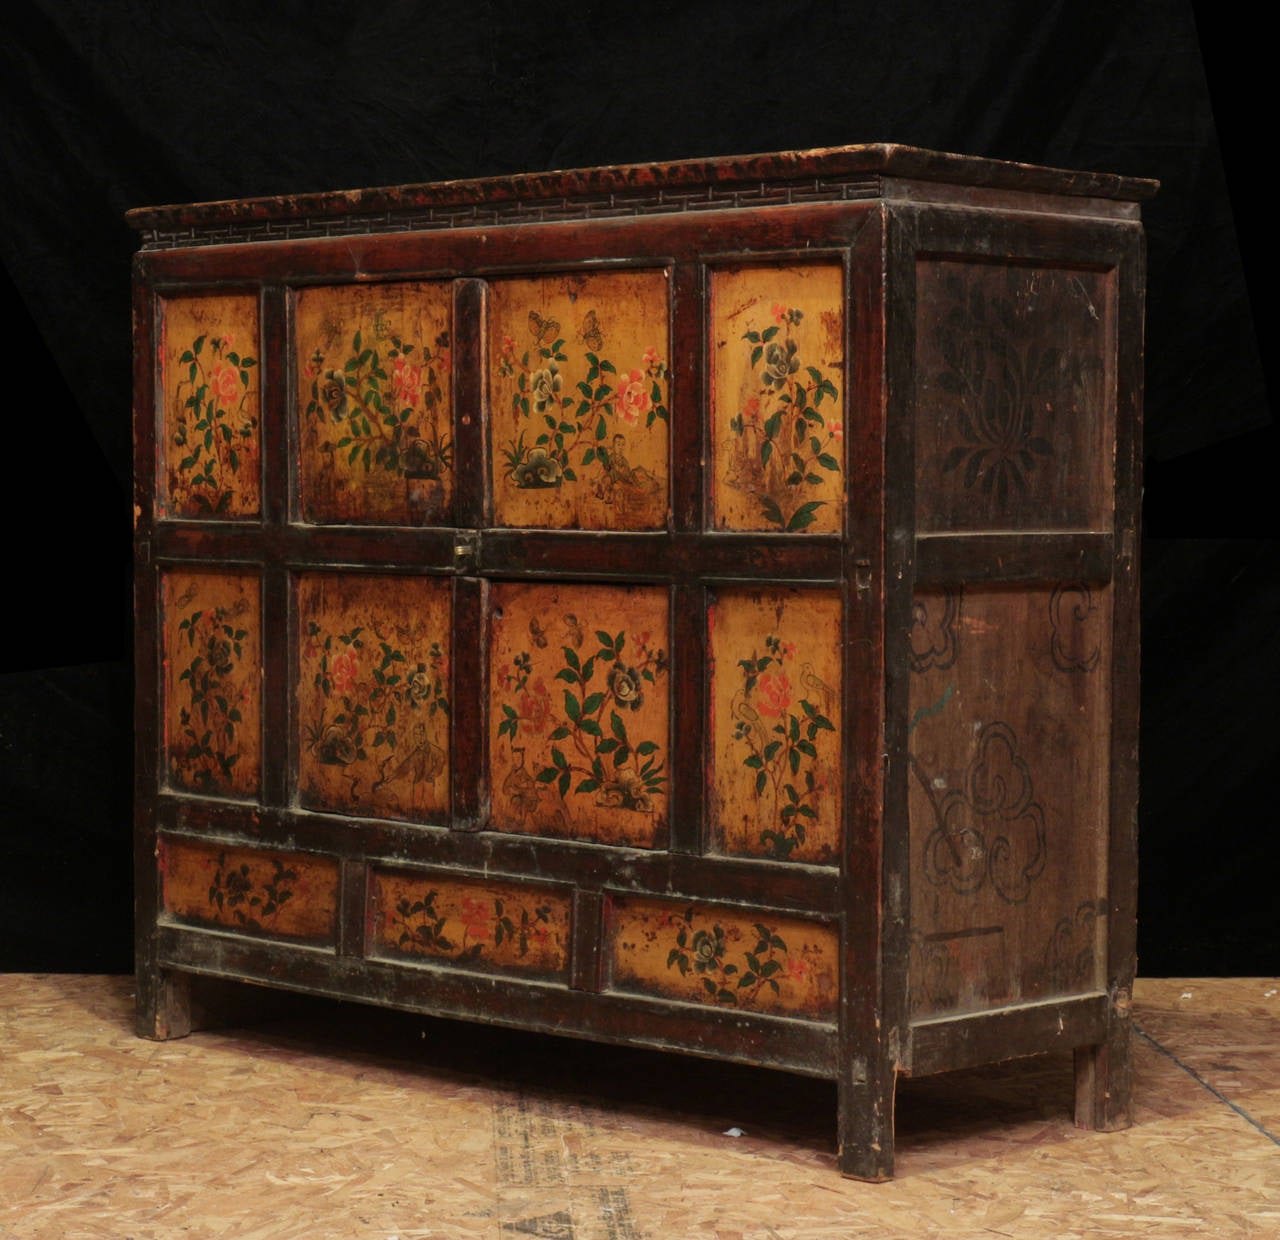 Excellent example of a real antique Tibetan cabinet from an aristocratic estate in Lhasa, Tibet. Note the fine brush work of the butterflies.